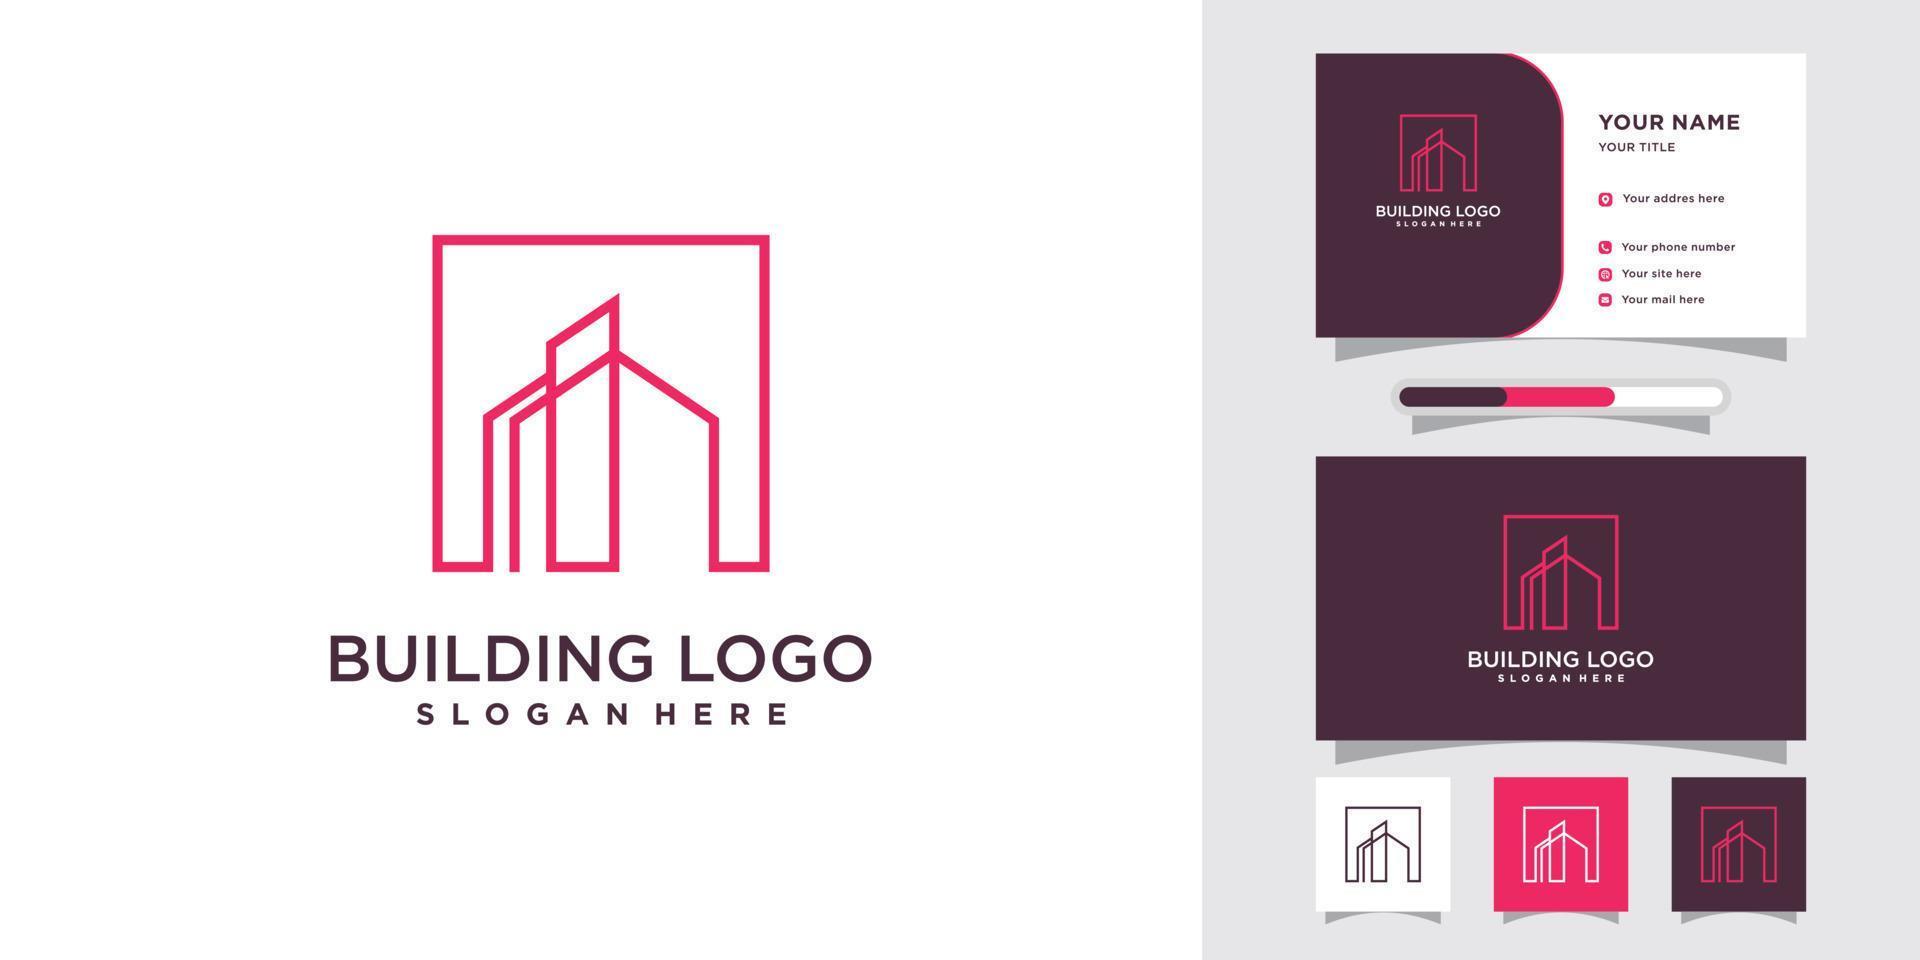 Building logo for business construction with line art style and business card design Premium Vector